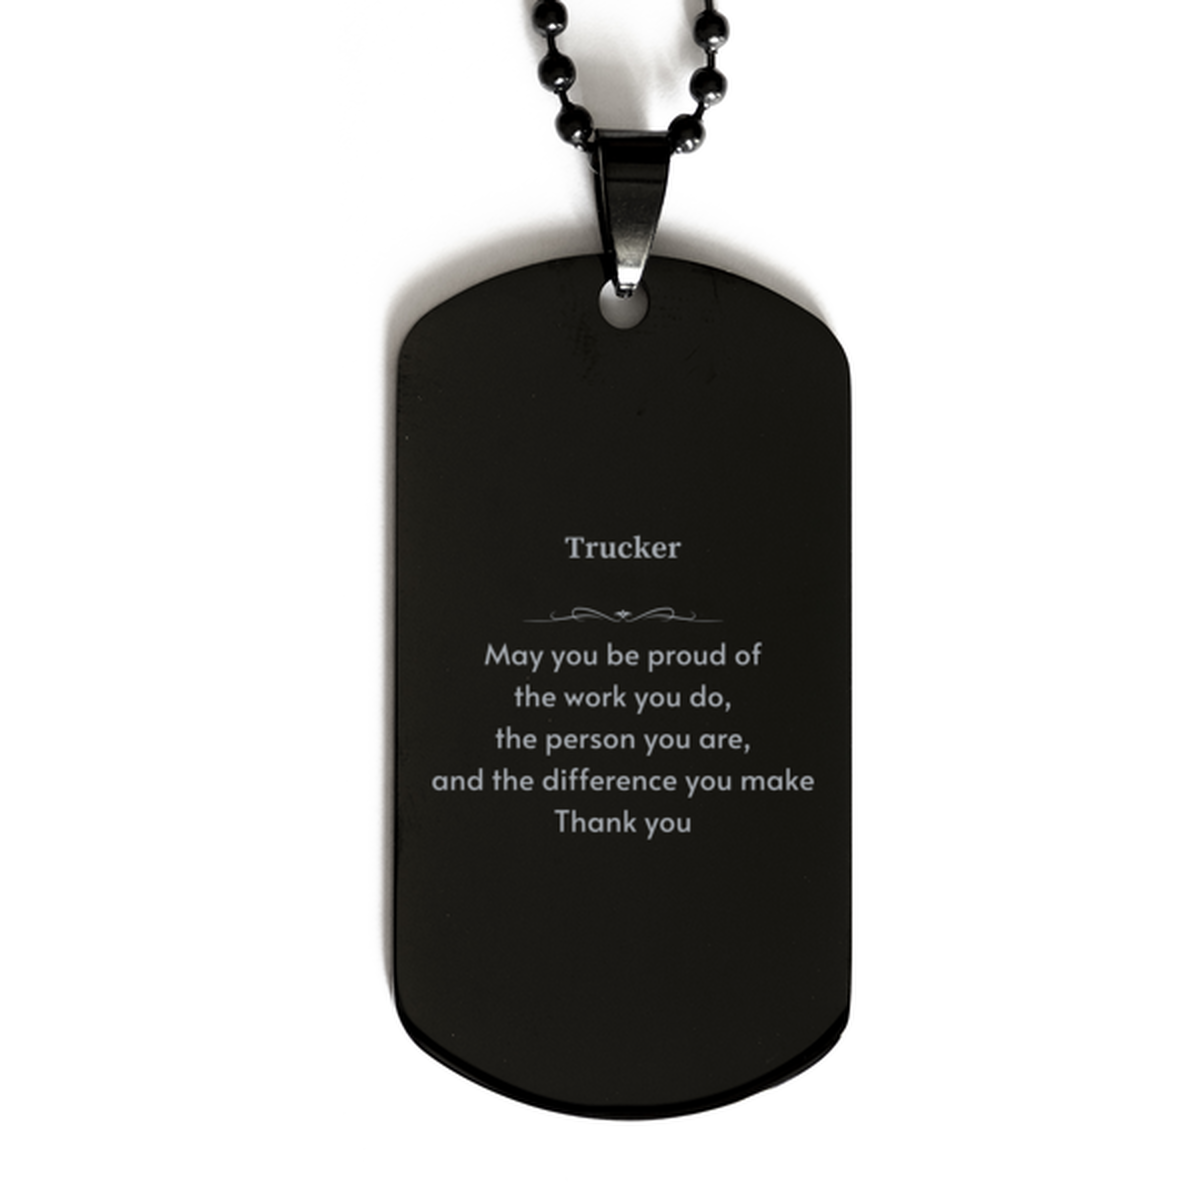 Heartwarming Black Dog Tag Retirement Coworkers Gifts for Trucker, Trucker May You be proud of the work you do, the person you are Gifts for Boss Men Women Friends